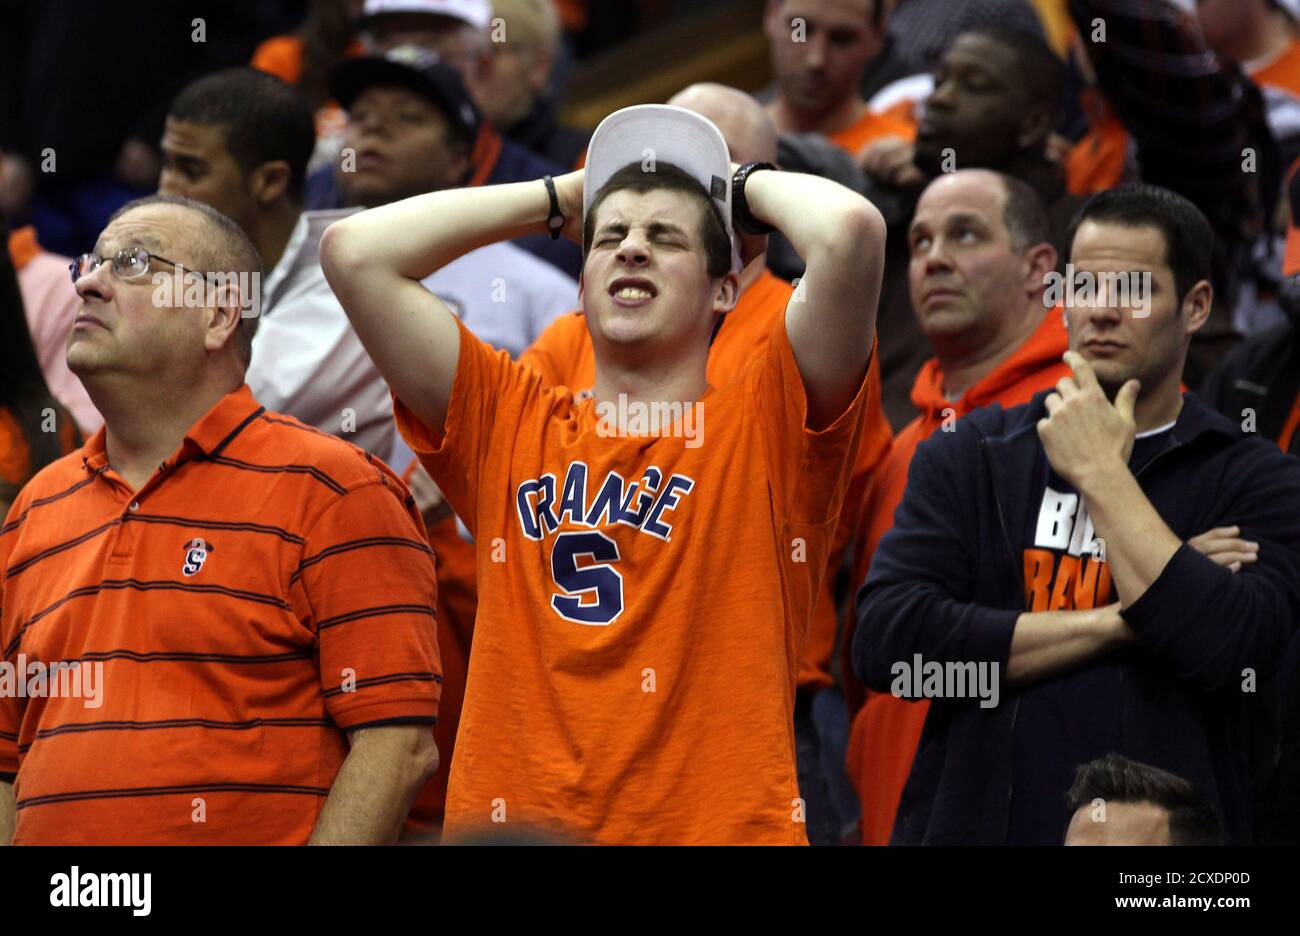 Syracuse fans react as the Orangemen are defeated by Marquette University during their third round NCAA basketball game in Cleveland March 20, 2011.REUTERS/Aaron Josefczyk (UNITED STATES - Tags: SPORT BASKETBALL) Stock Photo